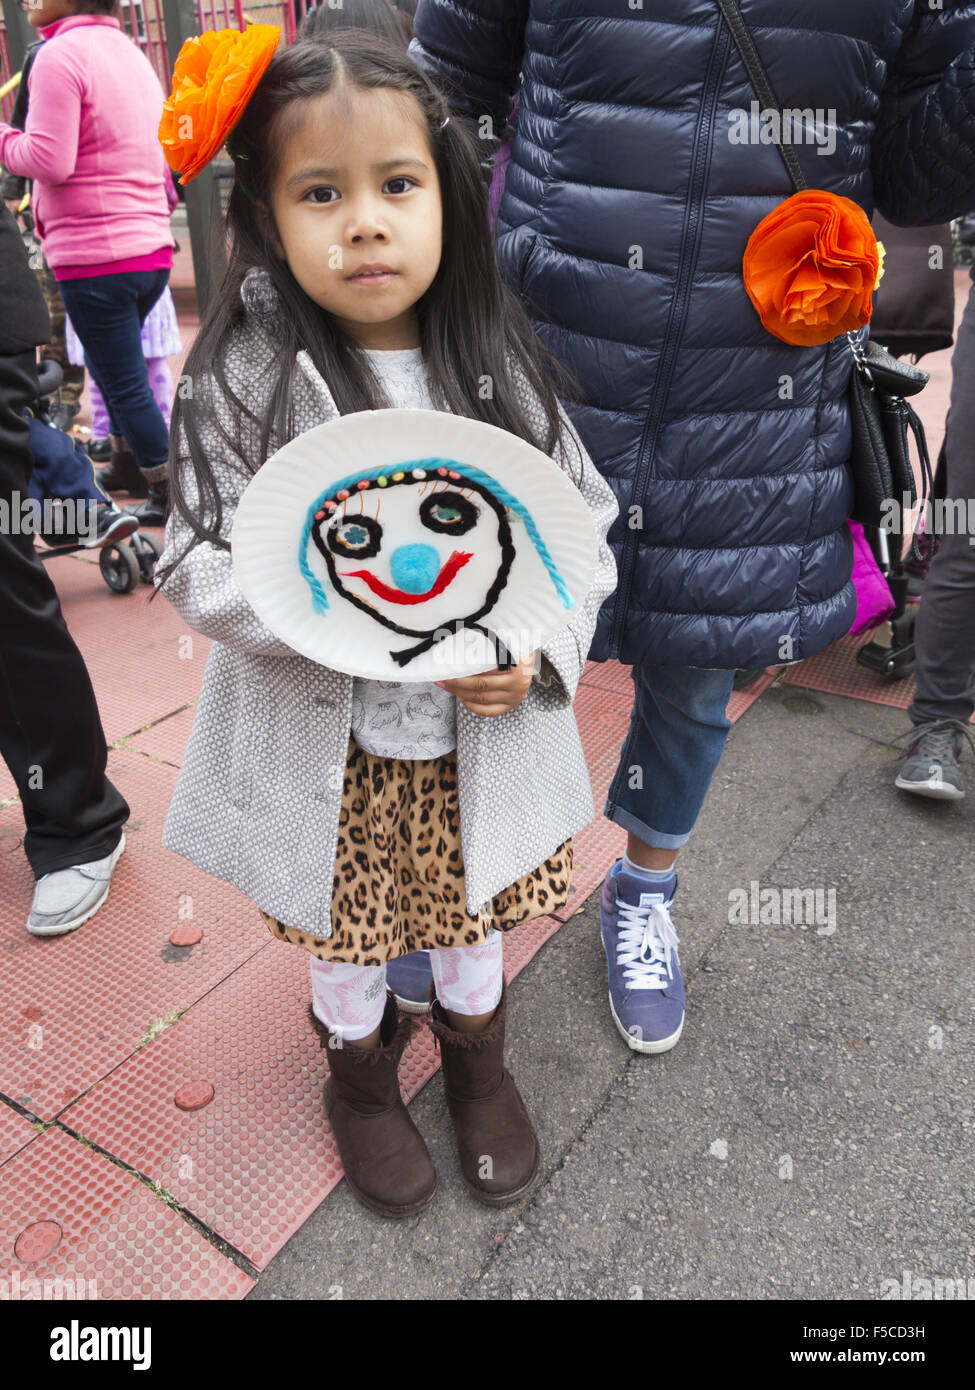 Day of the Dead Festival in the Kensington section of Brooklyn, NY, Nov.1, 2015. Young girl displays picture she made. Stock Photo